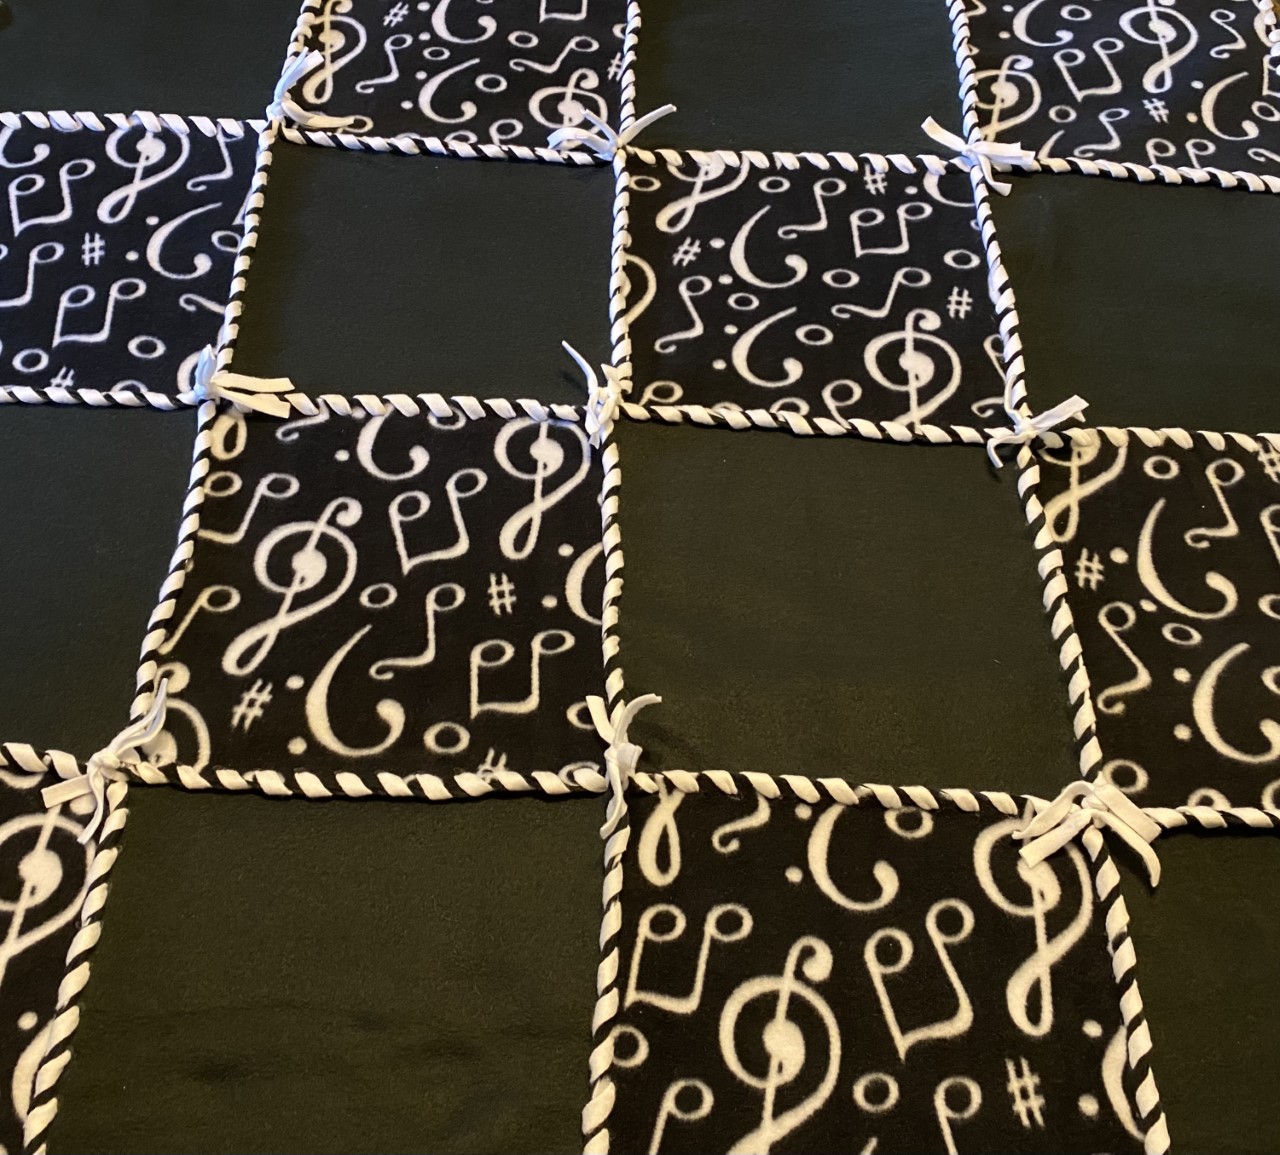 Fleece patchwork no sew lap blanket kit (48x48) 8 black squares with  white music notes, alternated with 8 solid black squares, woven together  with